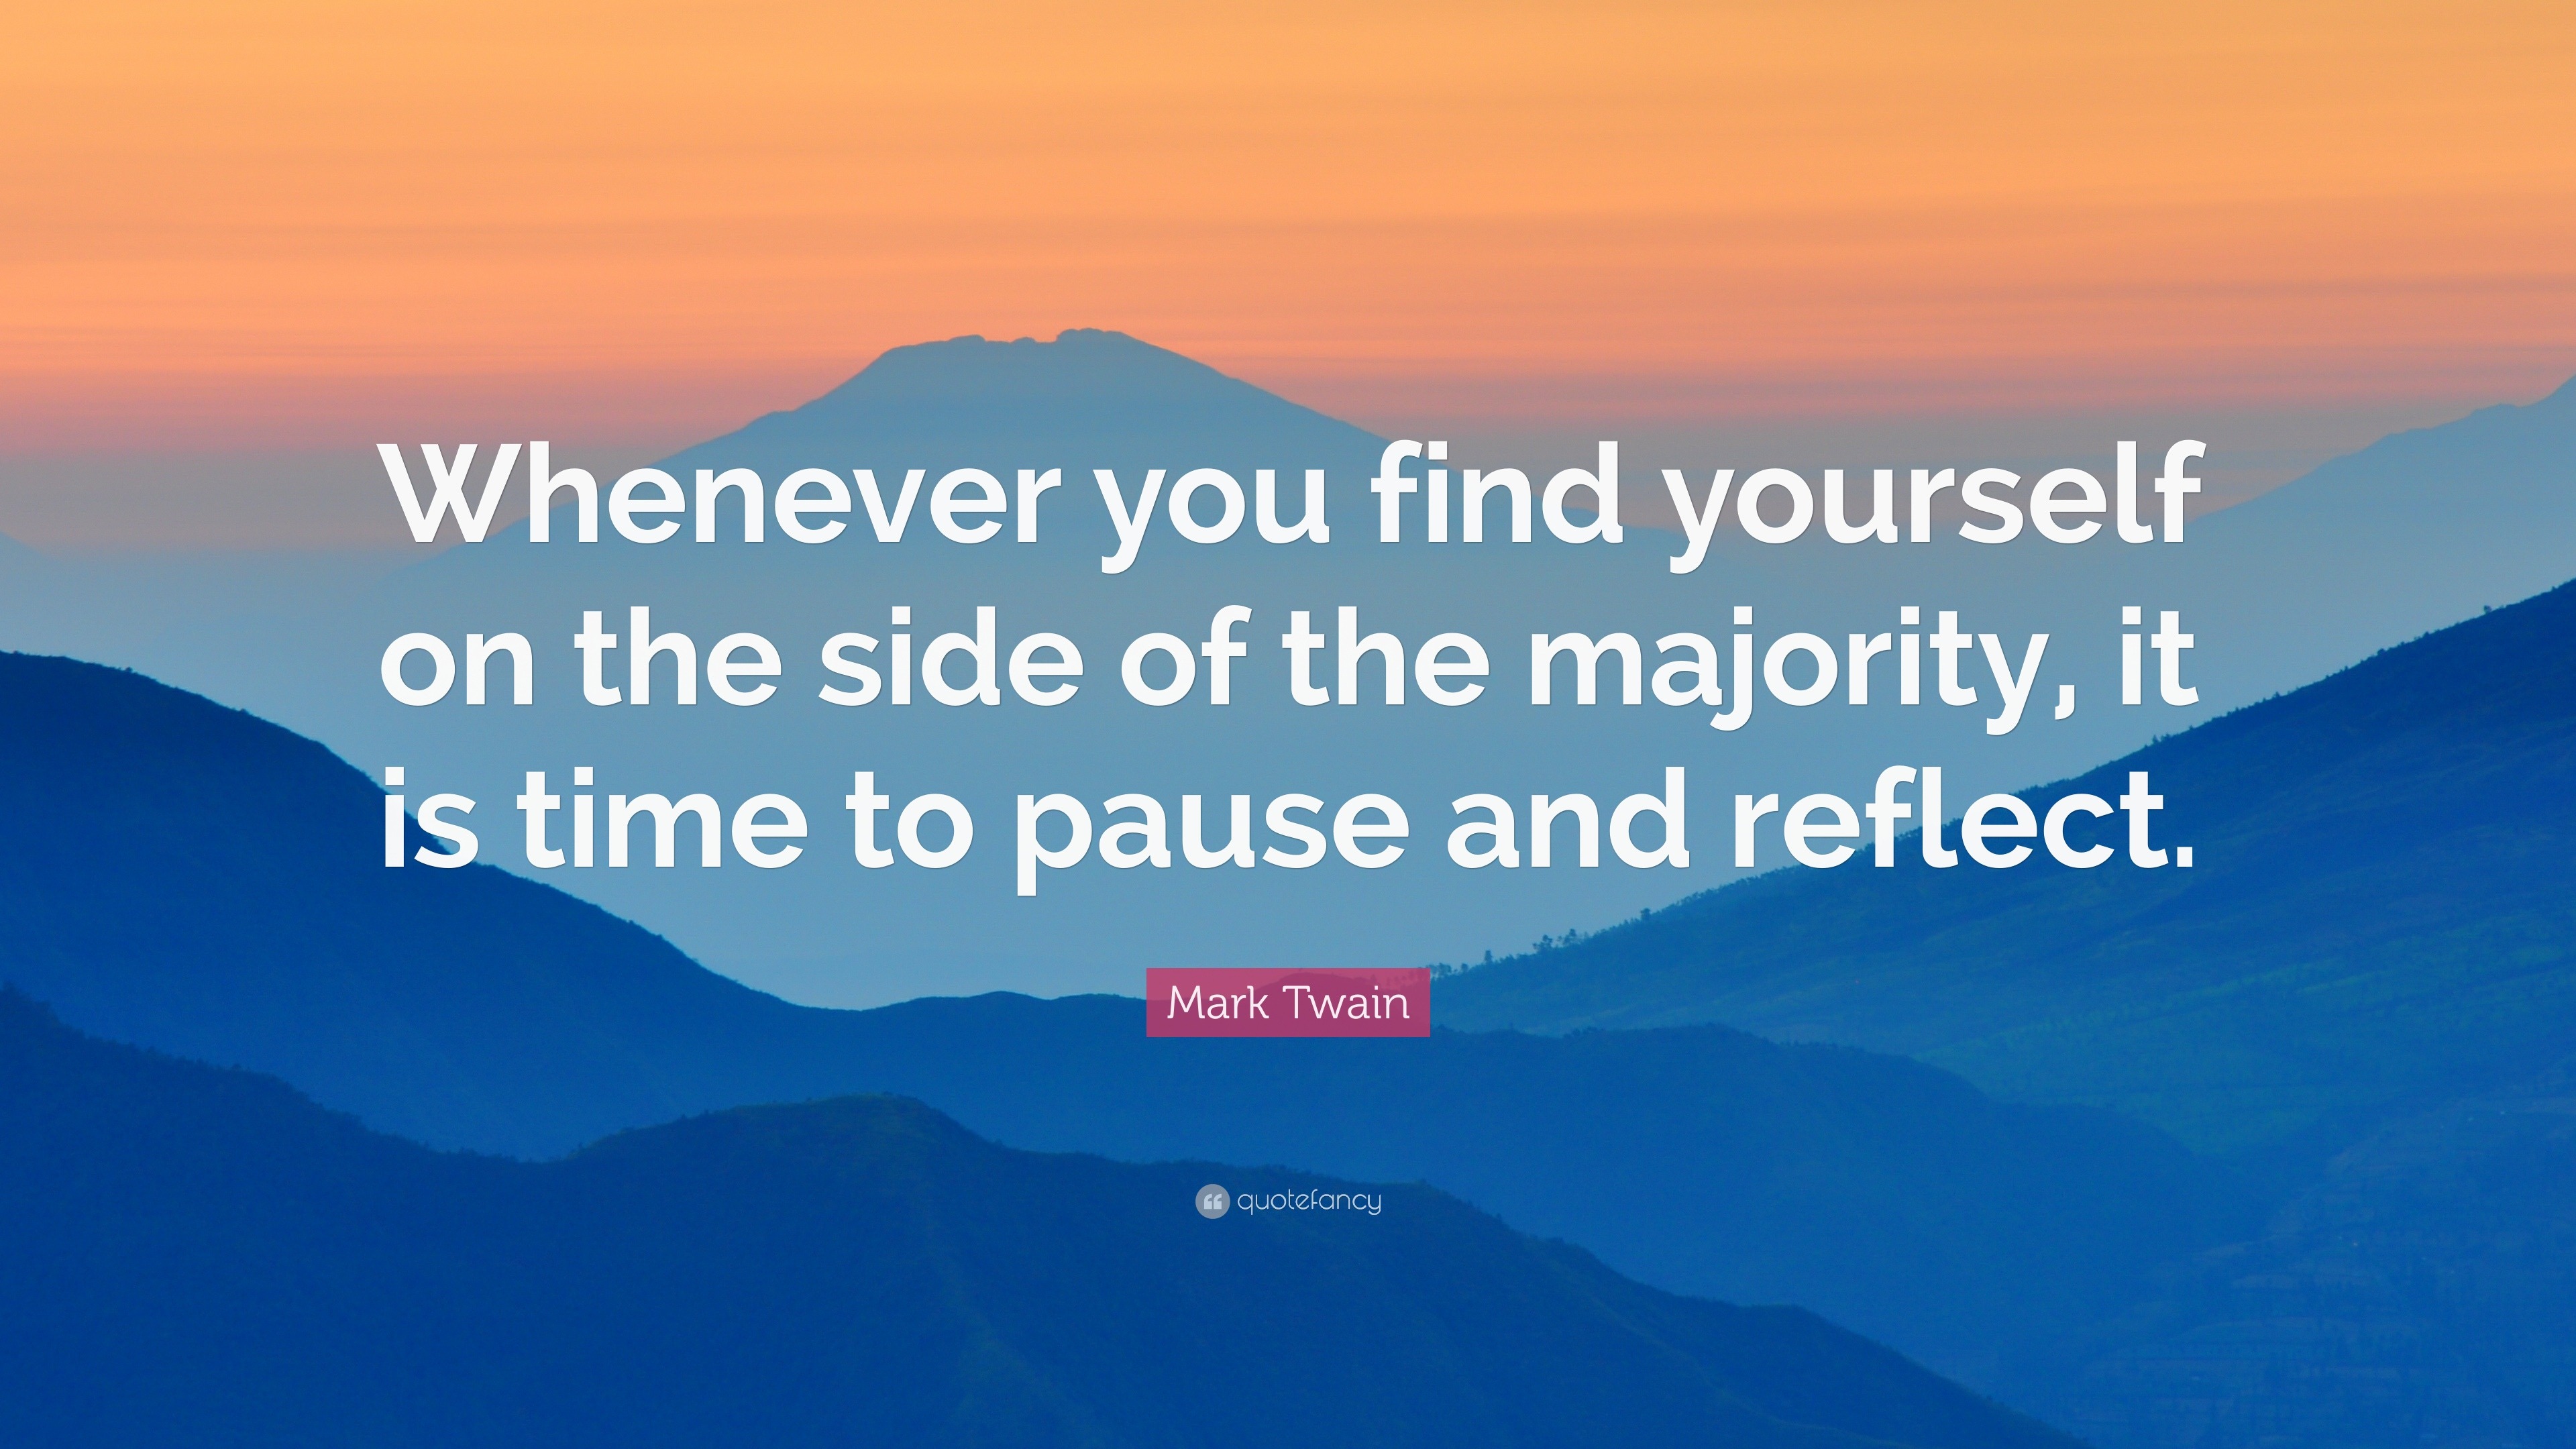 Mark Twain Quote: “Whenever you find yourself on the side of the ...